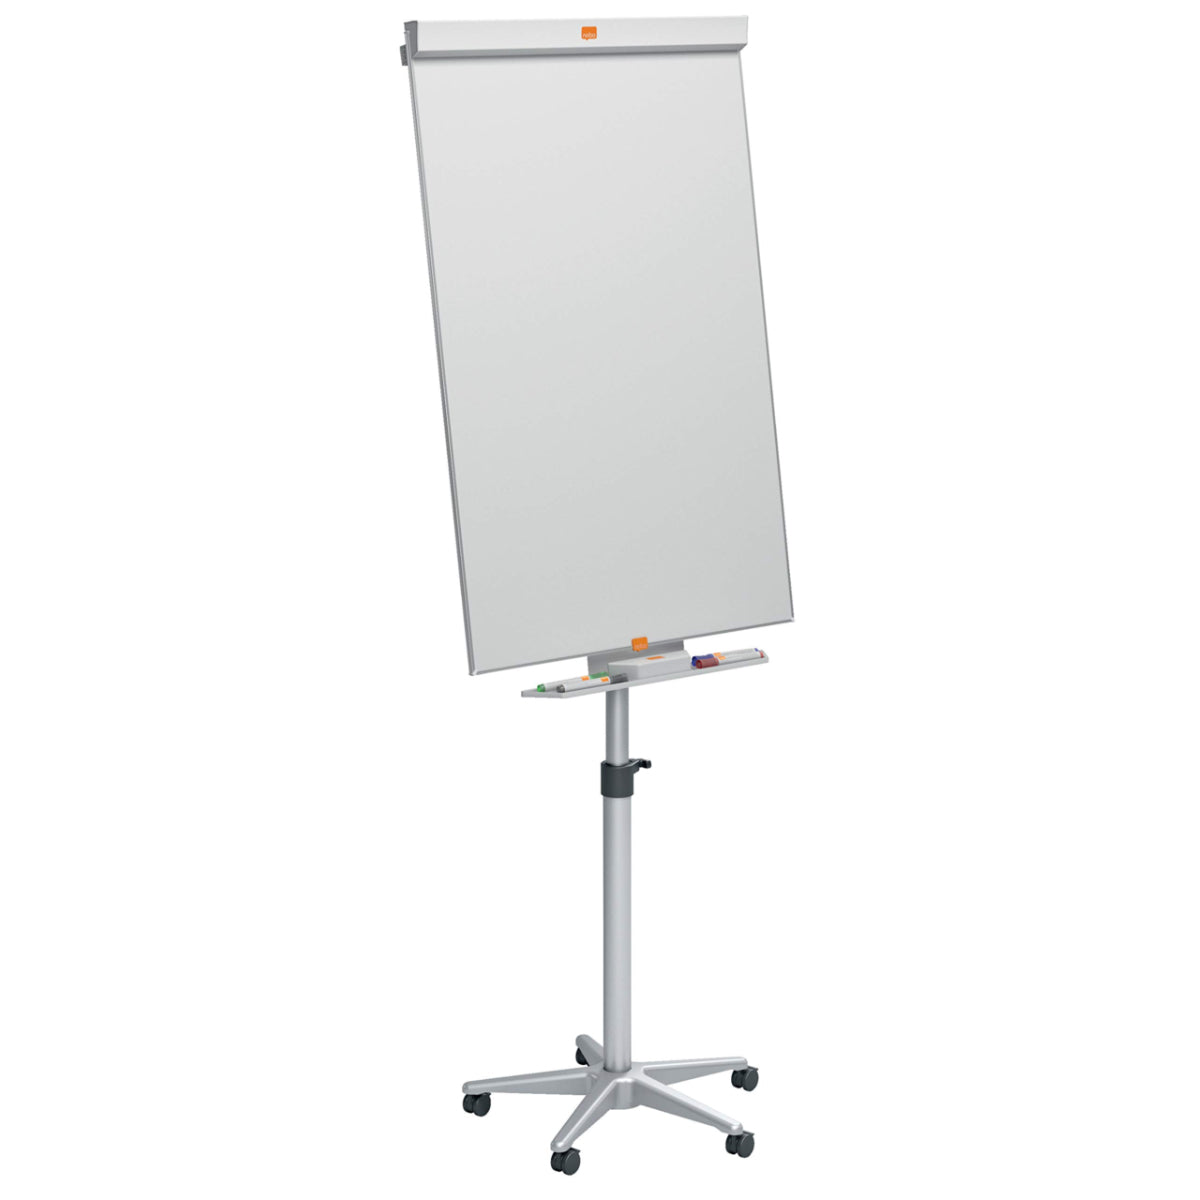 Flip chart pad and easel stock image. Image of business - 5221295